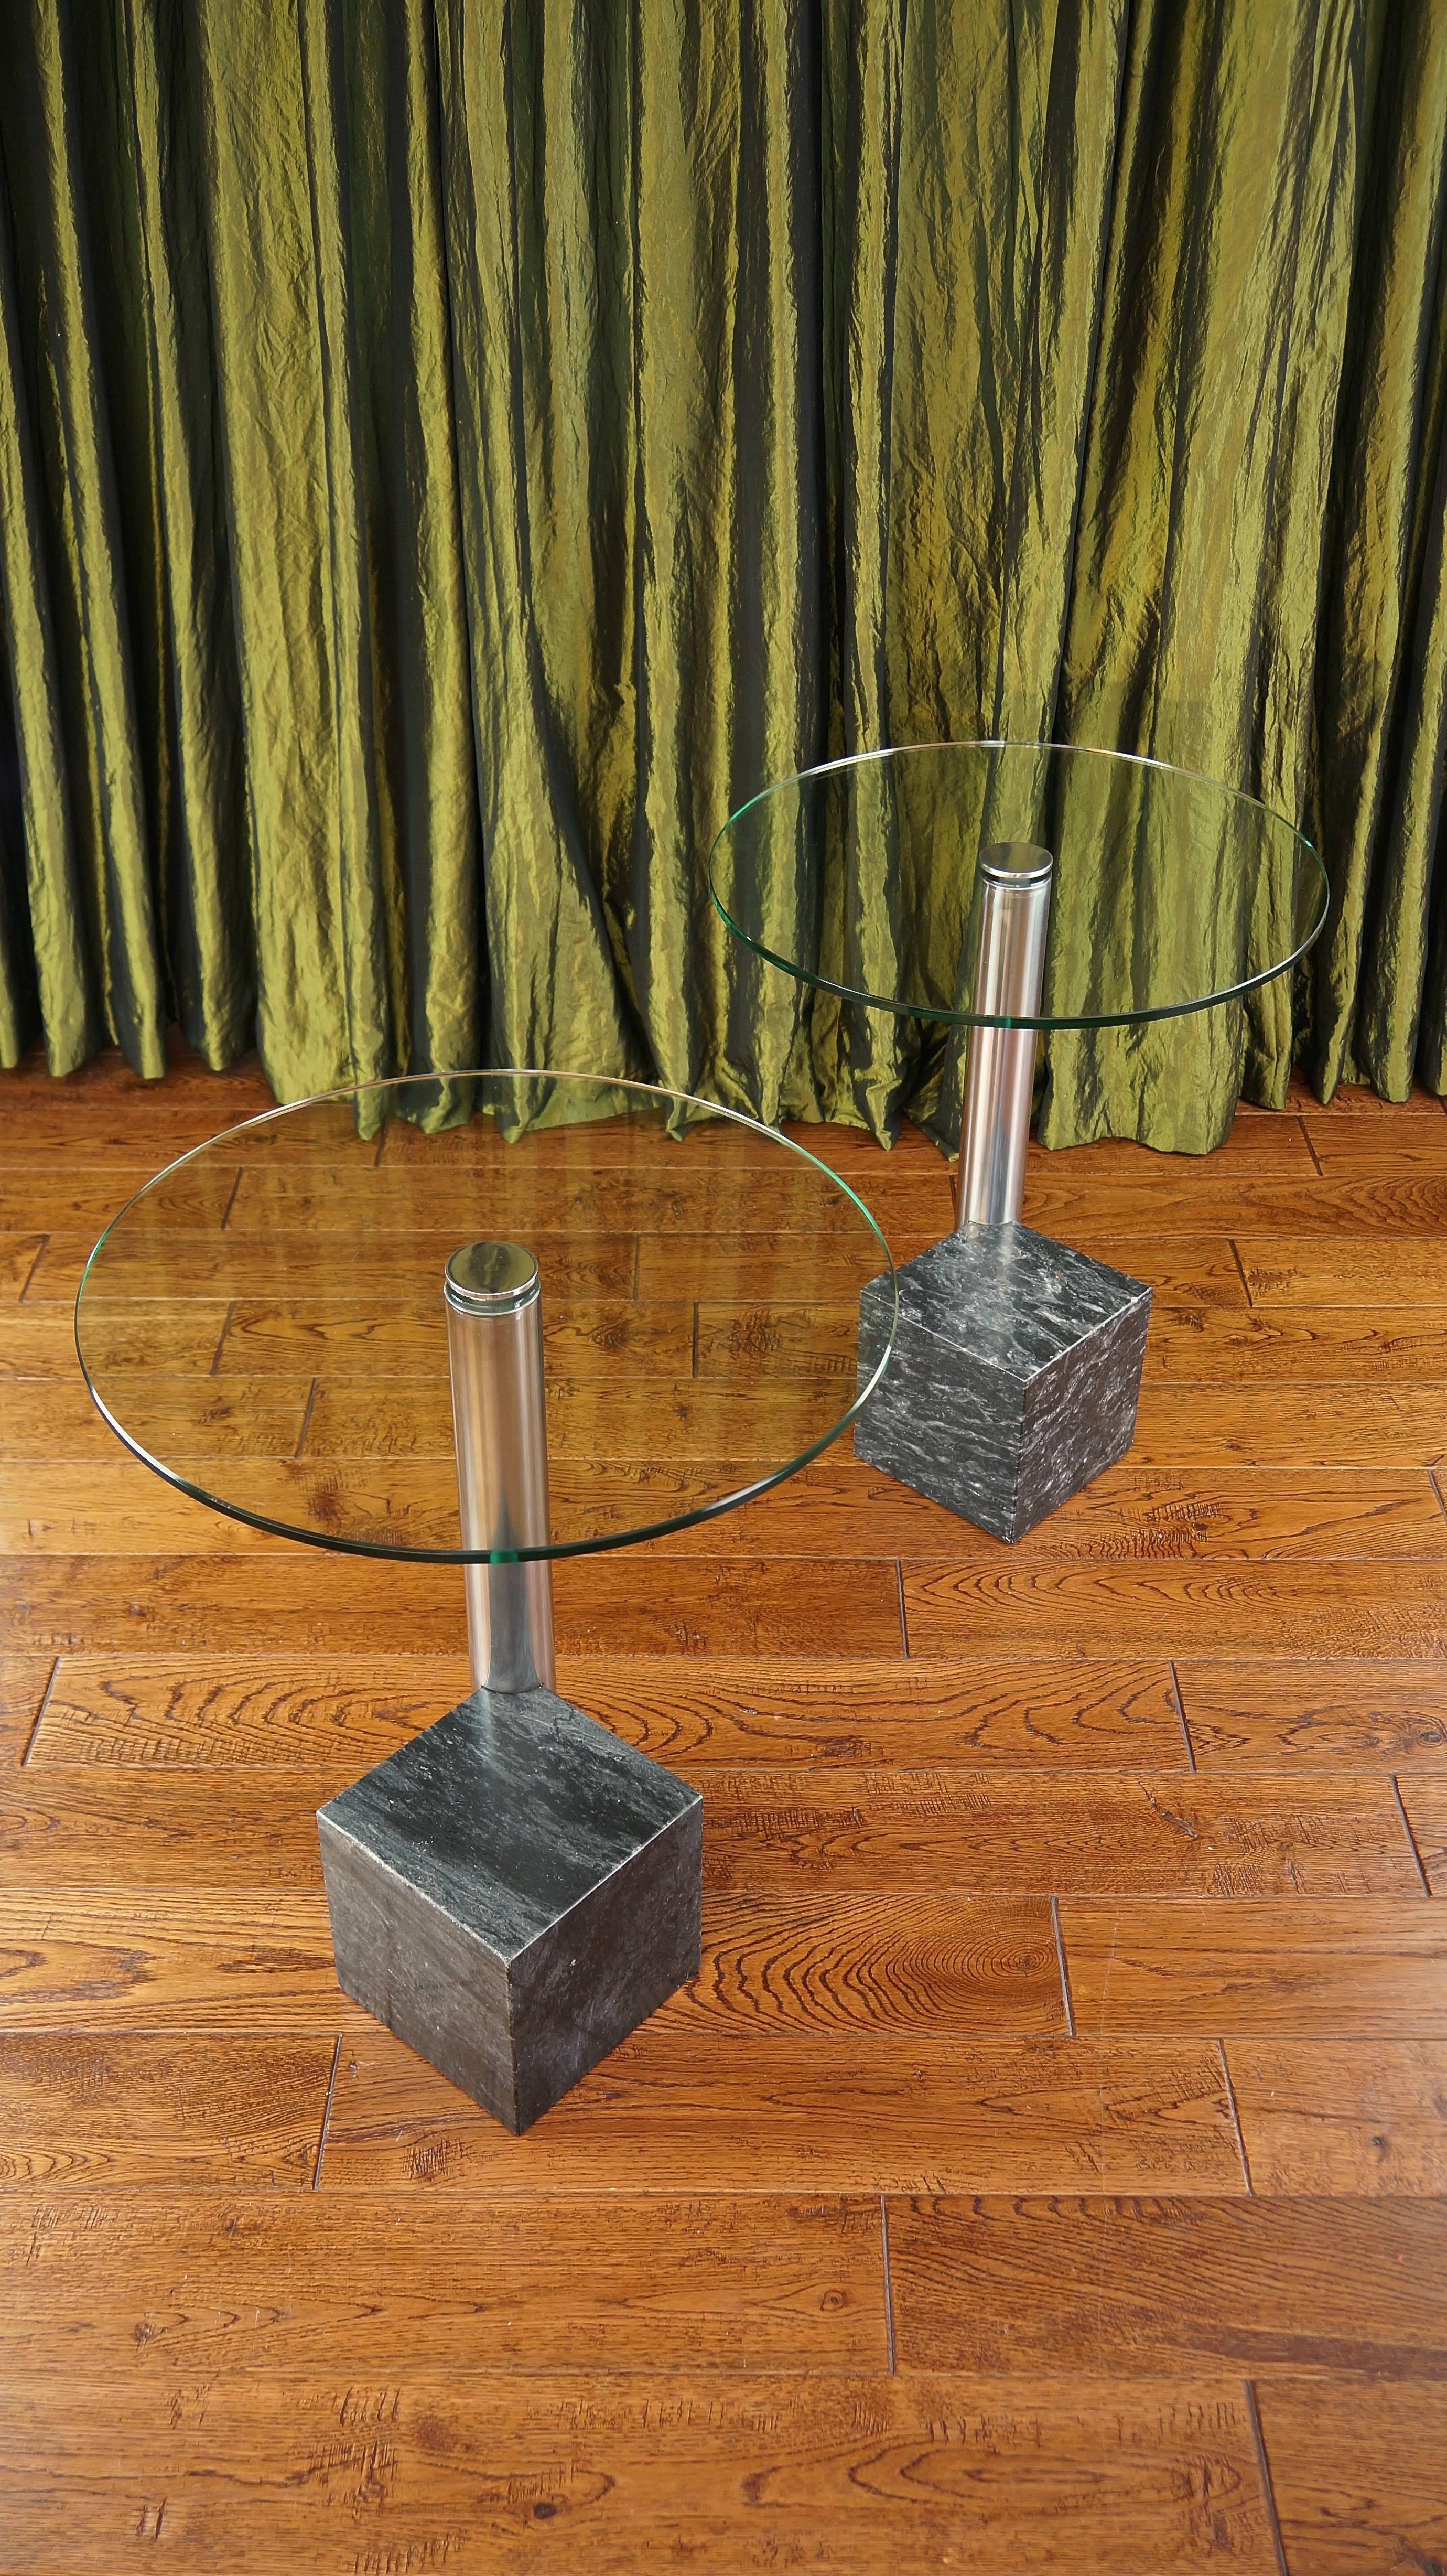 Pair of Vintage Marble and Glass HK2 Side Tables by Hank Kwint, Metaform 1980s For Sale 4